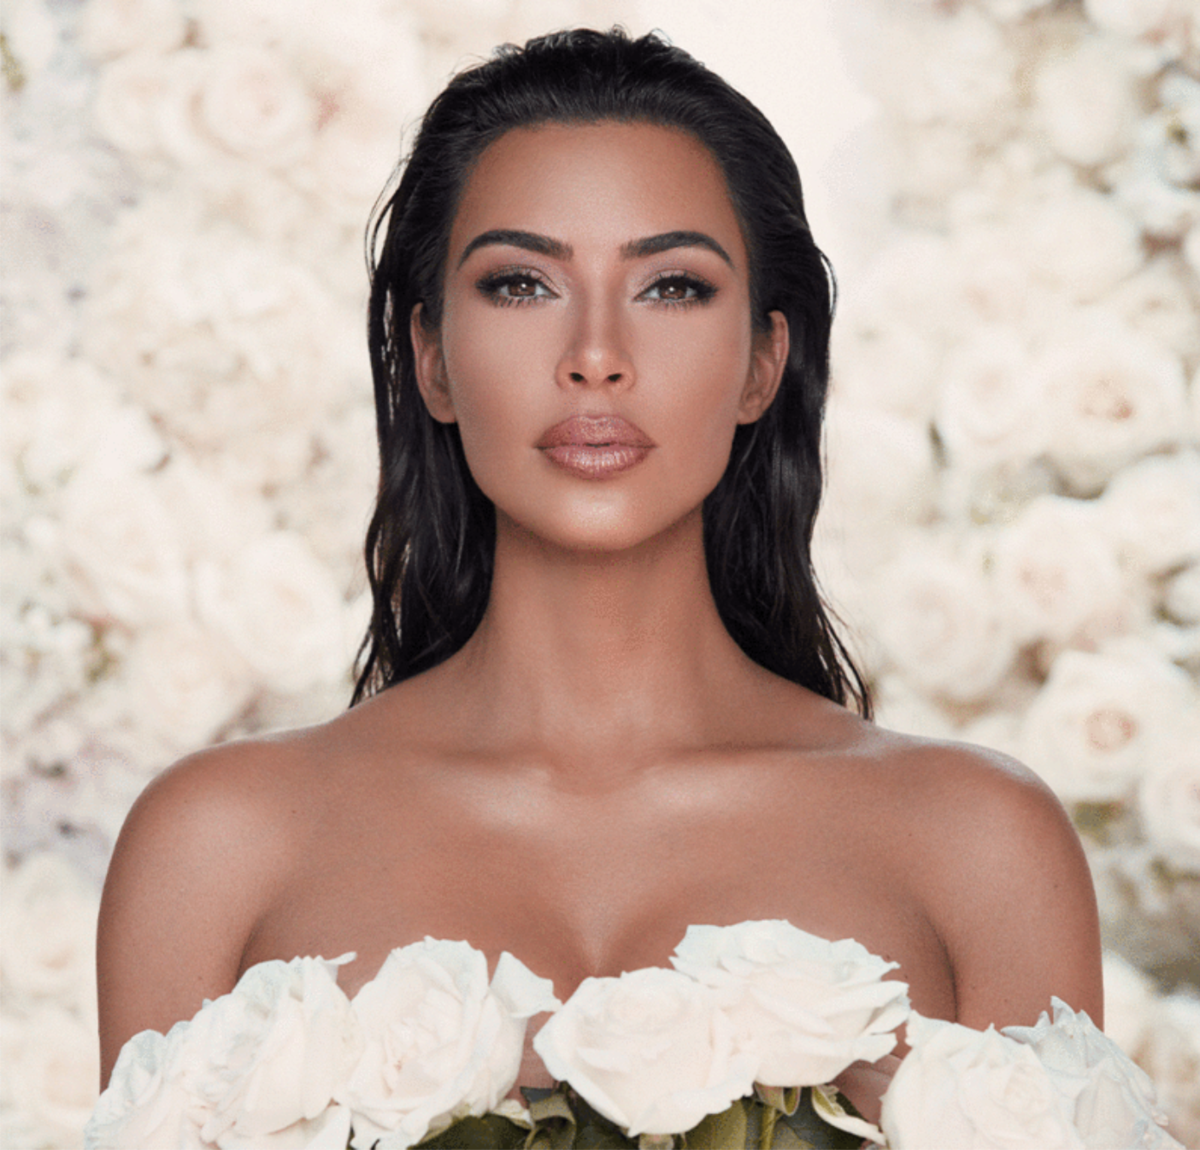 Kim Kardashian Releases New Makeup Collection Inspired By Her Own Wedding